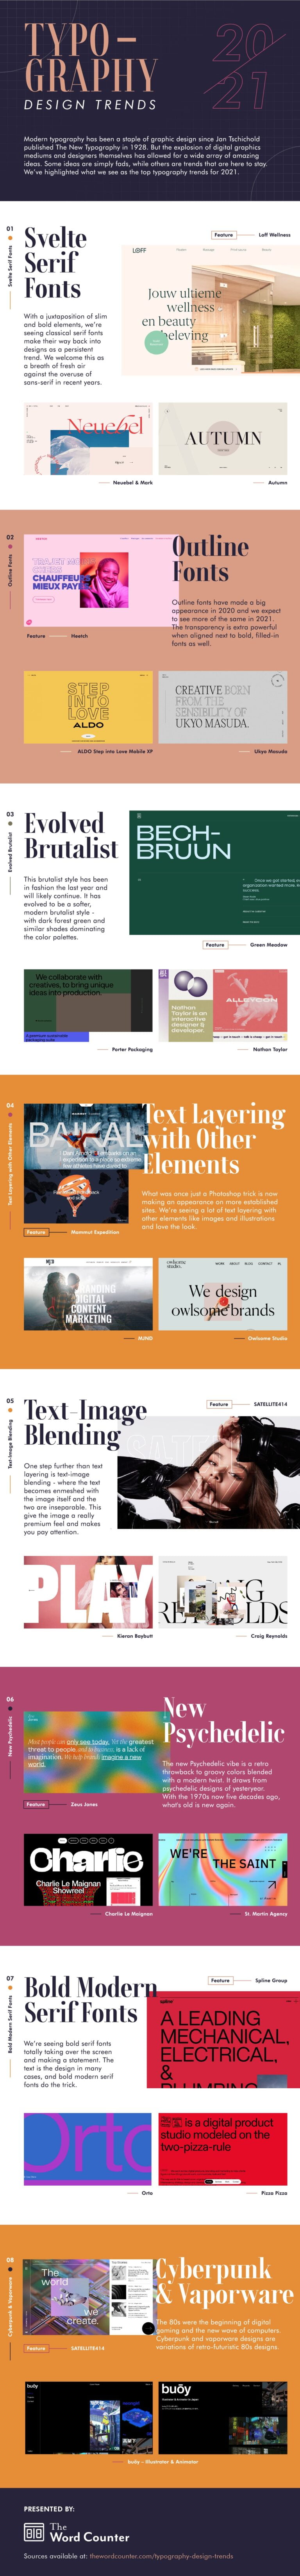 8 Typography Design Trends for 2021 – [Infographic]